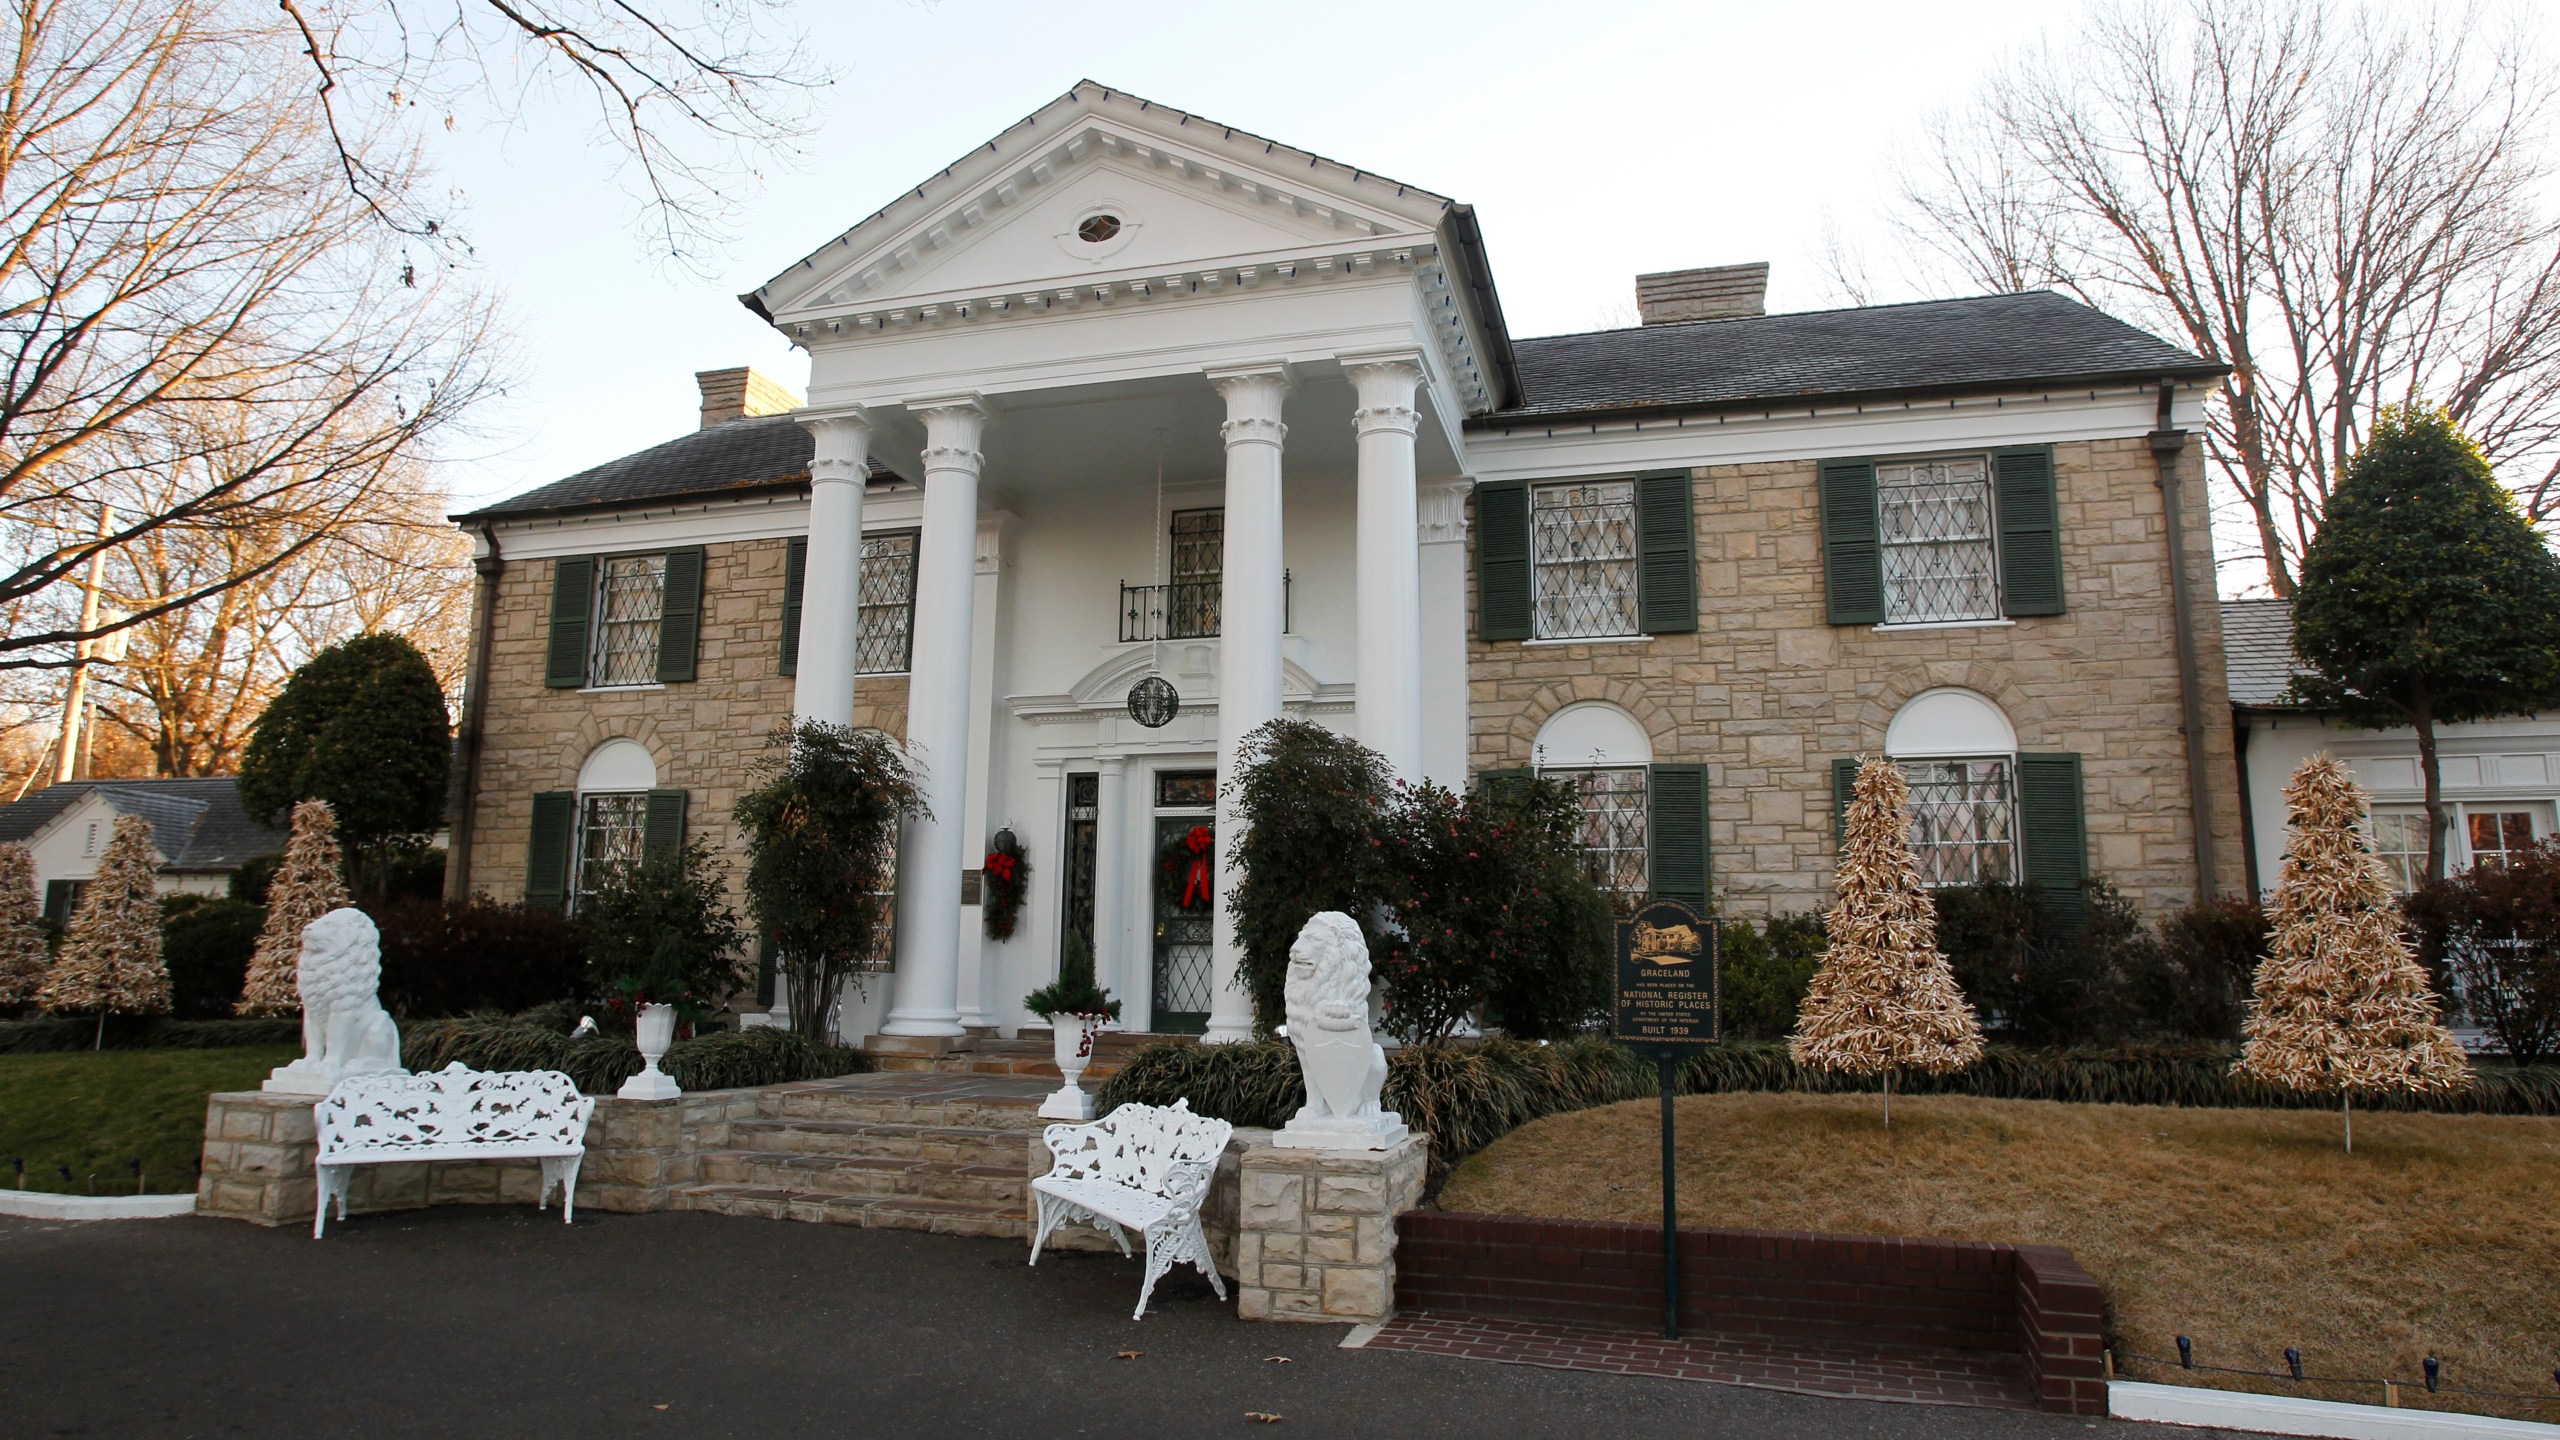 FILE - Graceland, Elvis Presley's home, is pictured, Jan. 7, 2011, in Memphis, Tenn. The Tennessee attorney general's office said Tuesday, June 25, 2024, that it has turned over its investigation into the failed sale of Presley’s home Graceland at a foreclosure auction to federal authorities, a newspaper reported. (AP Photo/Mark Humphrey, File)